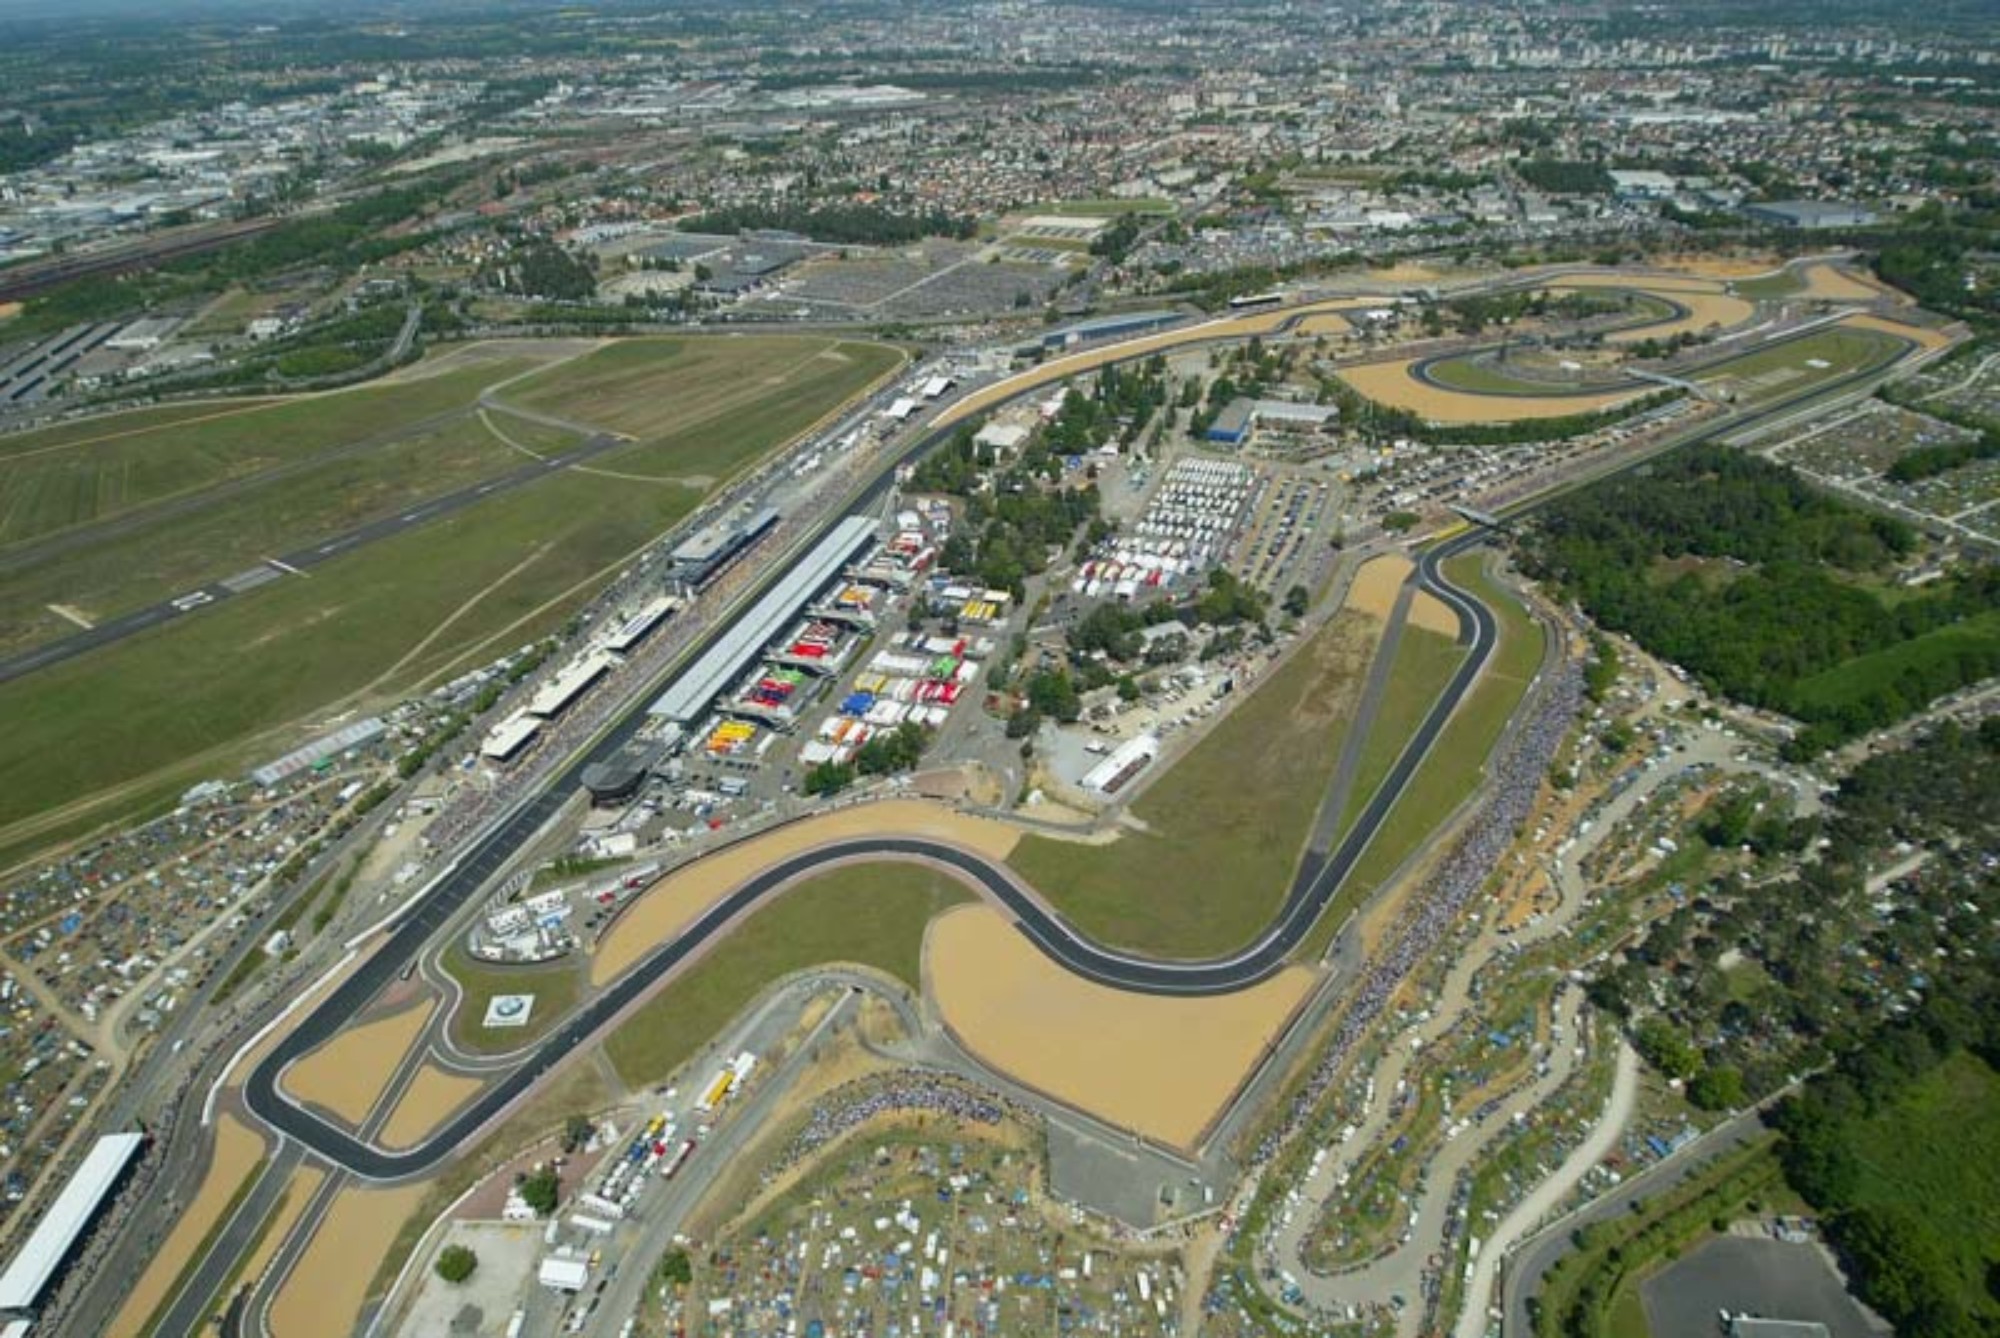 MotoGP beIN SPORTS Announces Its Broadcast Schedule For The French Grand Prix